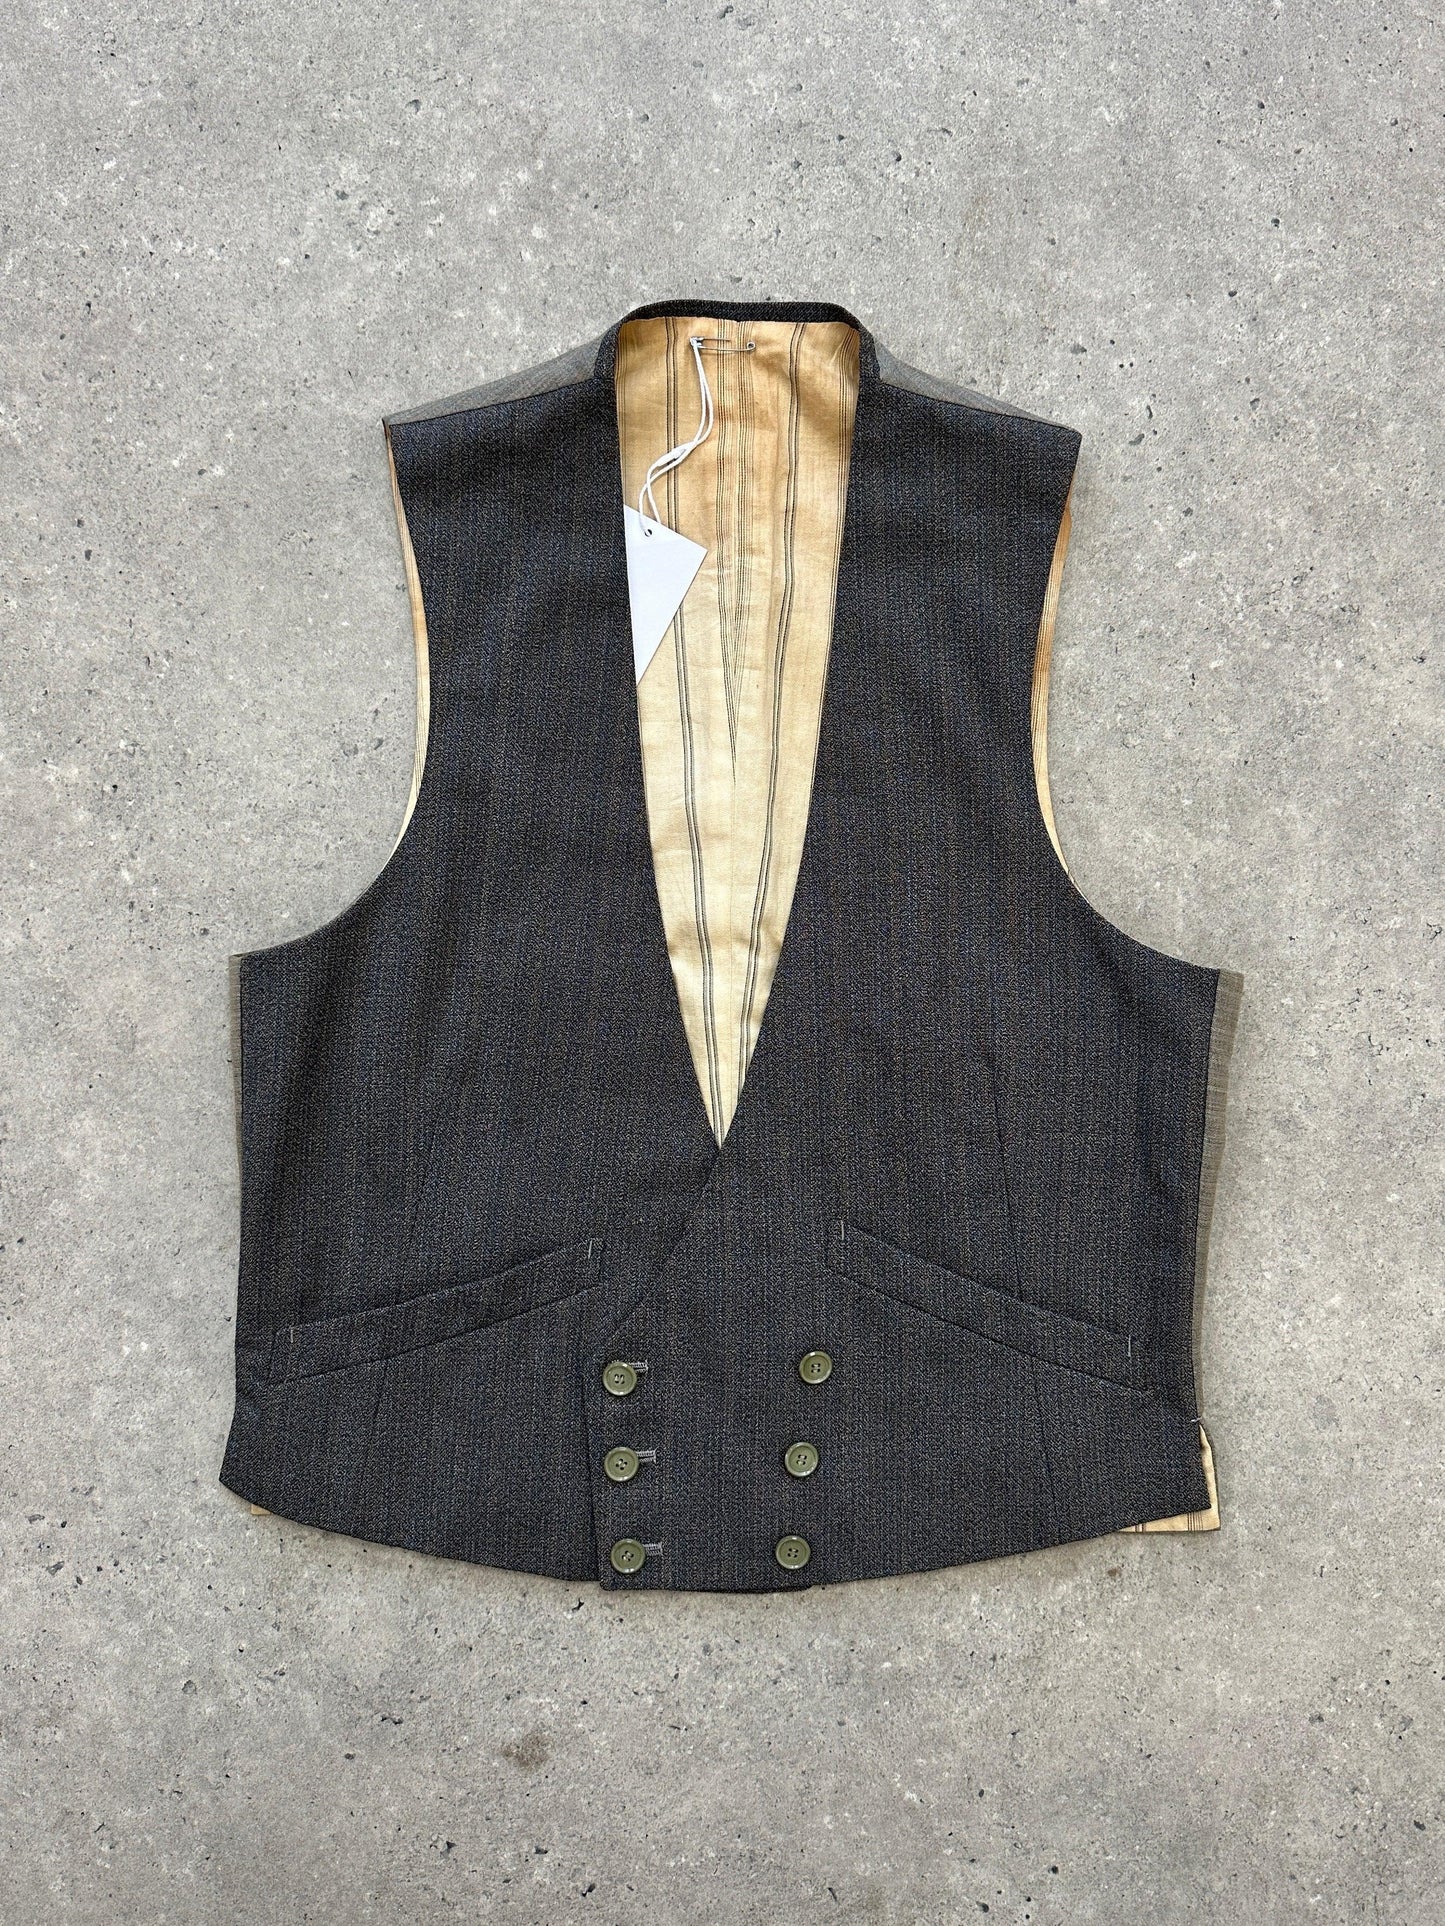 Vintage Wool Pinstripe Double Breasted Waistcoat - M - Known Source